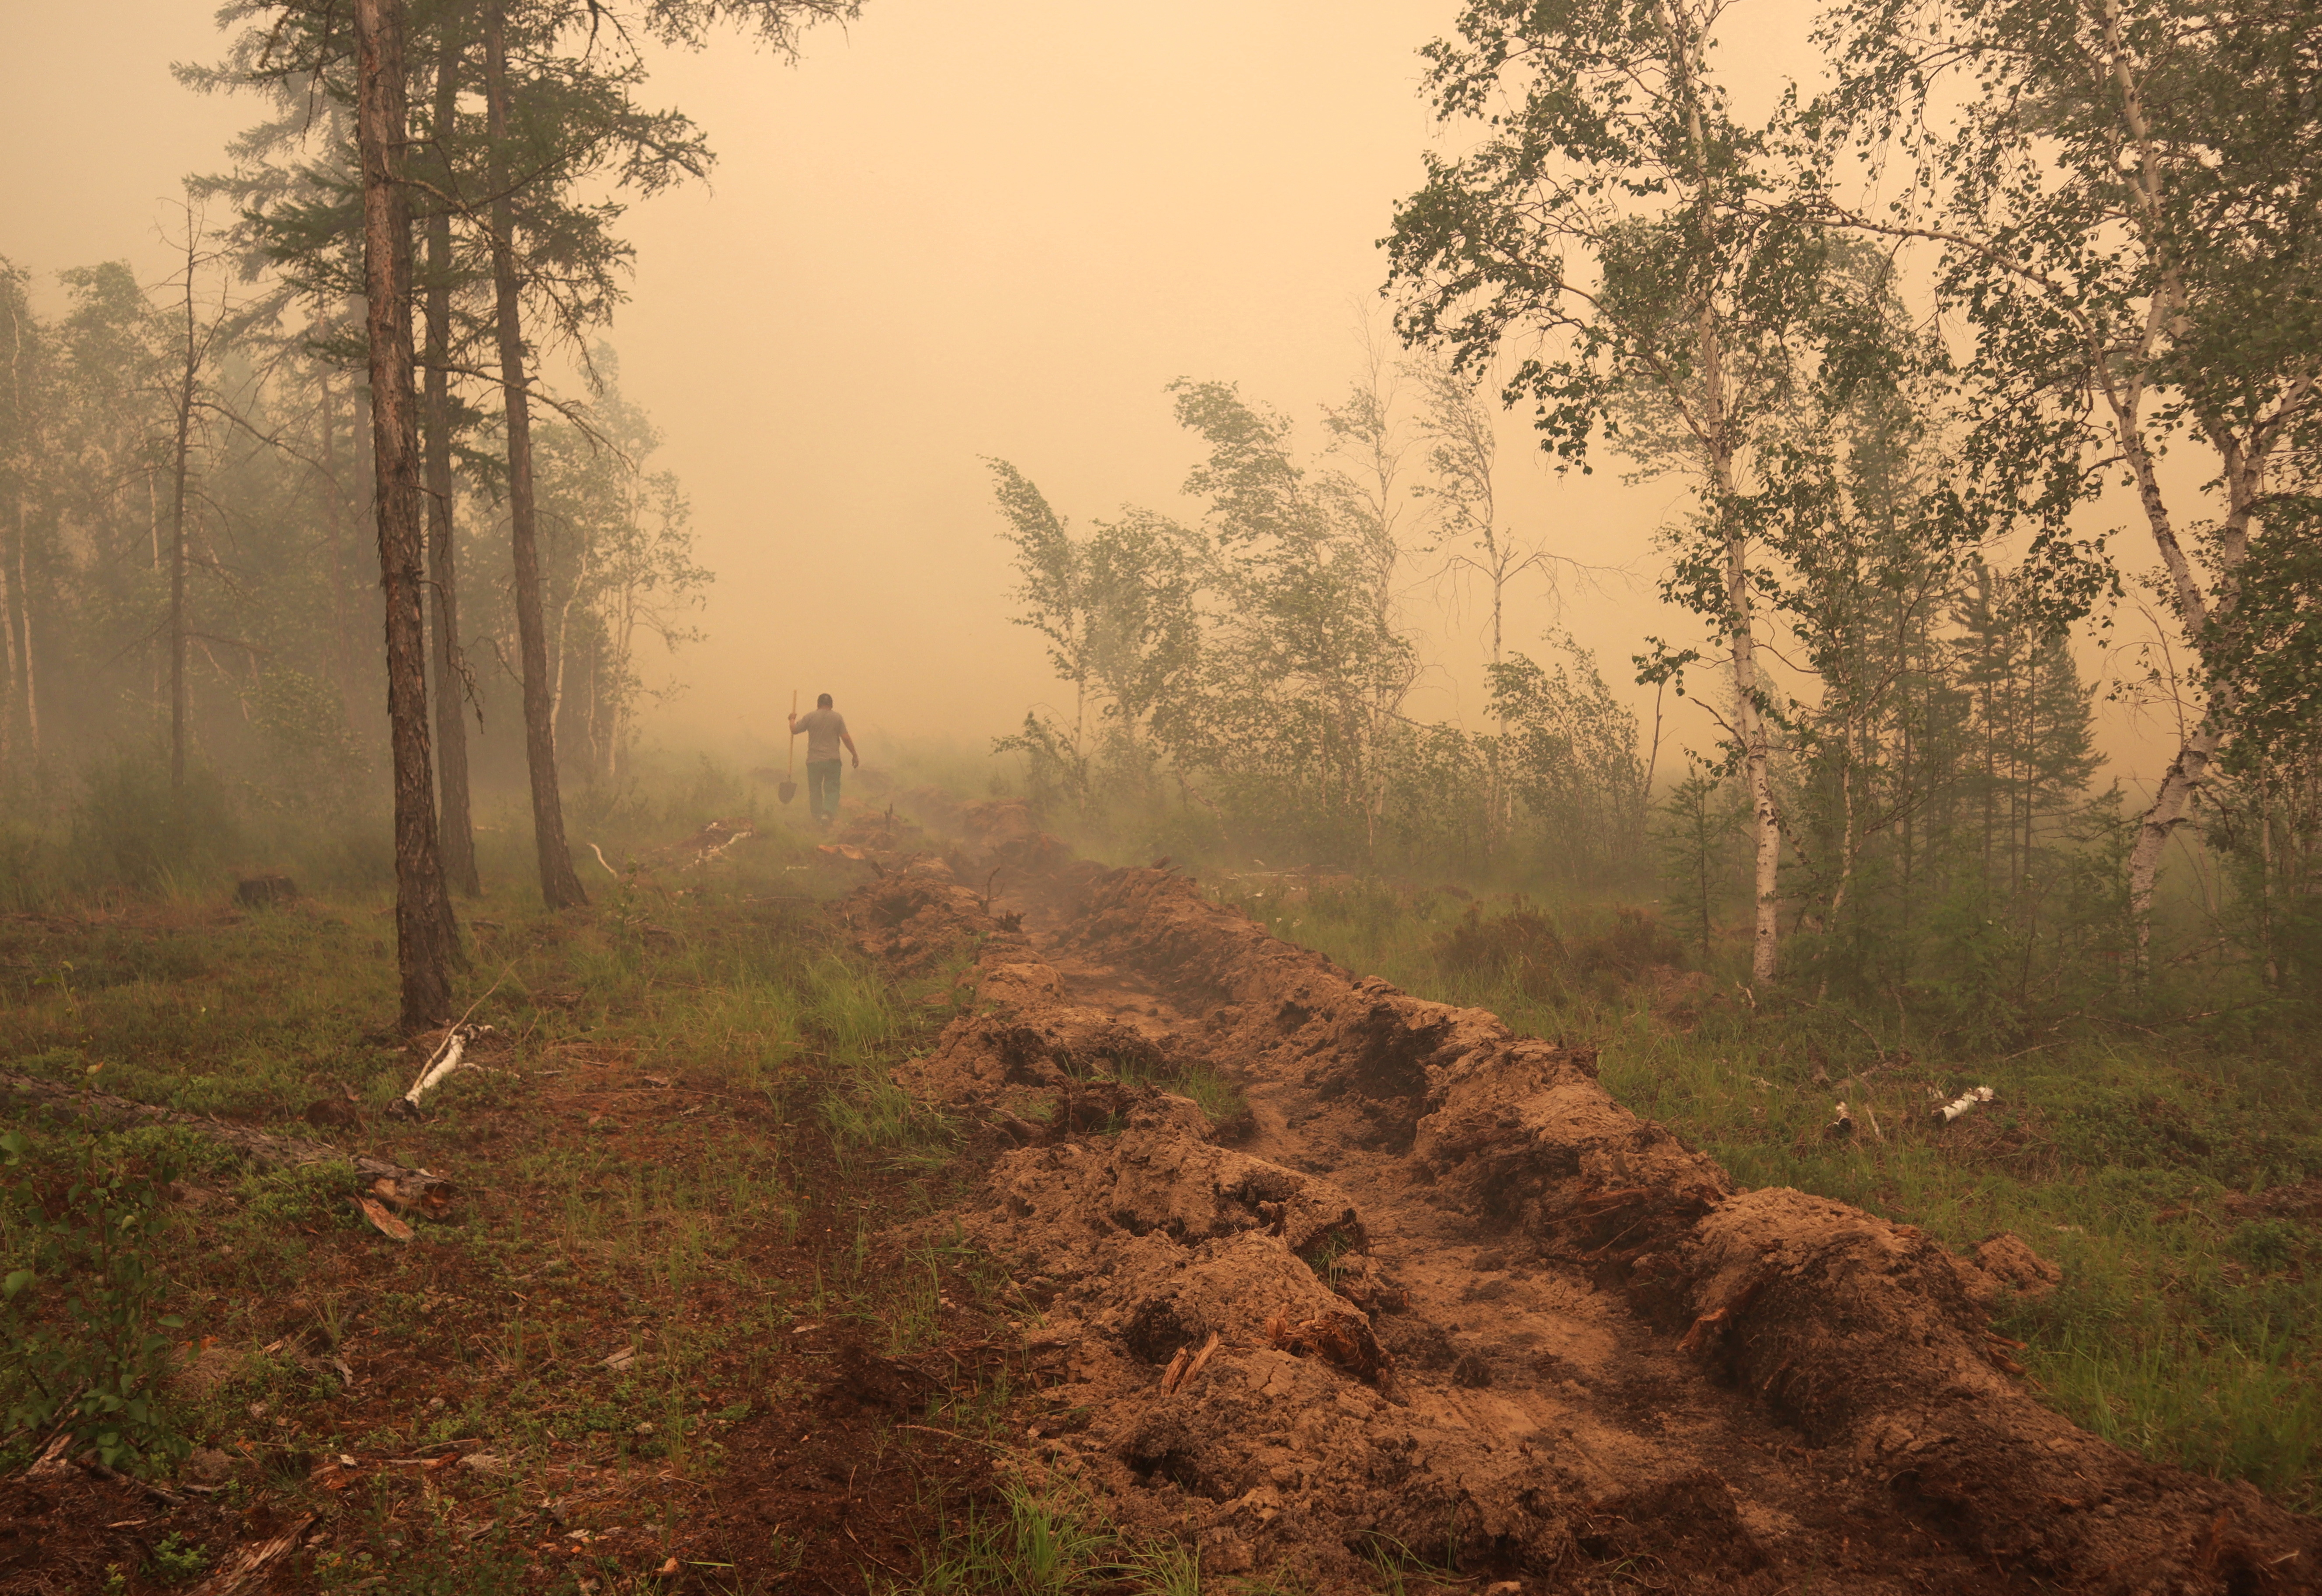 A man digs a control line during the work on extinguishing a forest fire near the village of Magaras in the region of Yakutia, Russia July 17, 2021. REUTERS/Roman Kutukov